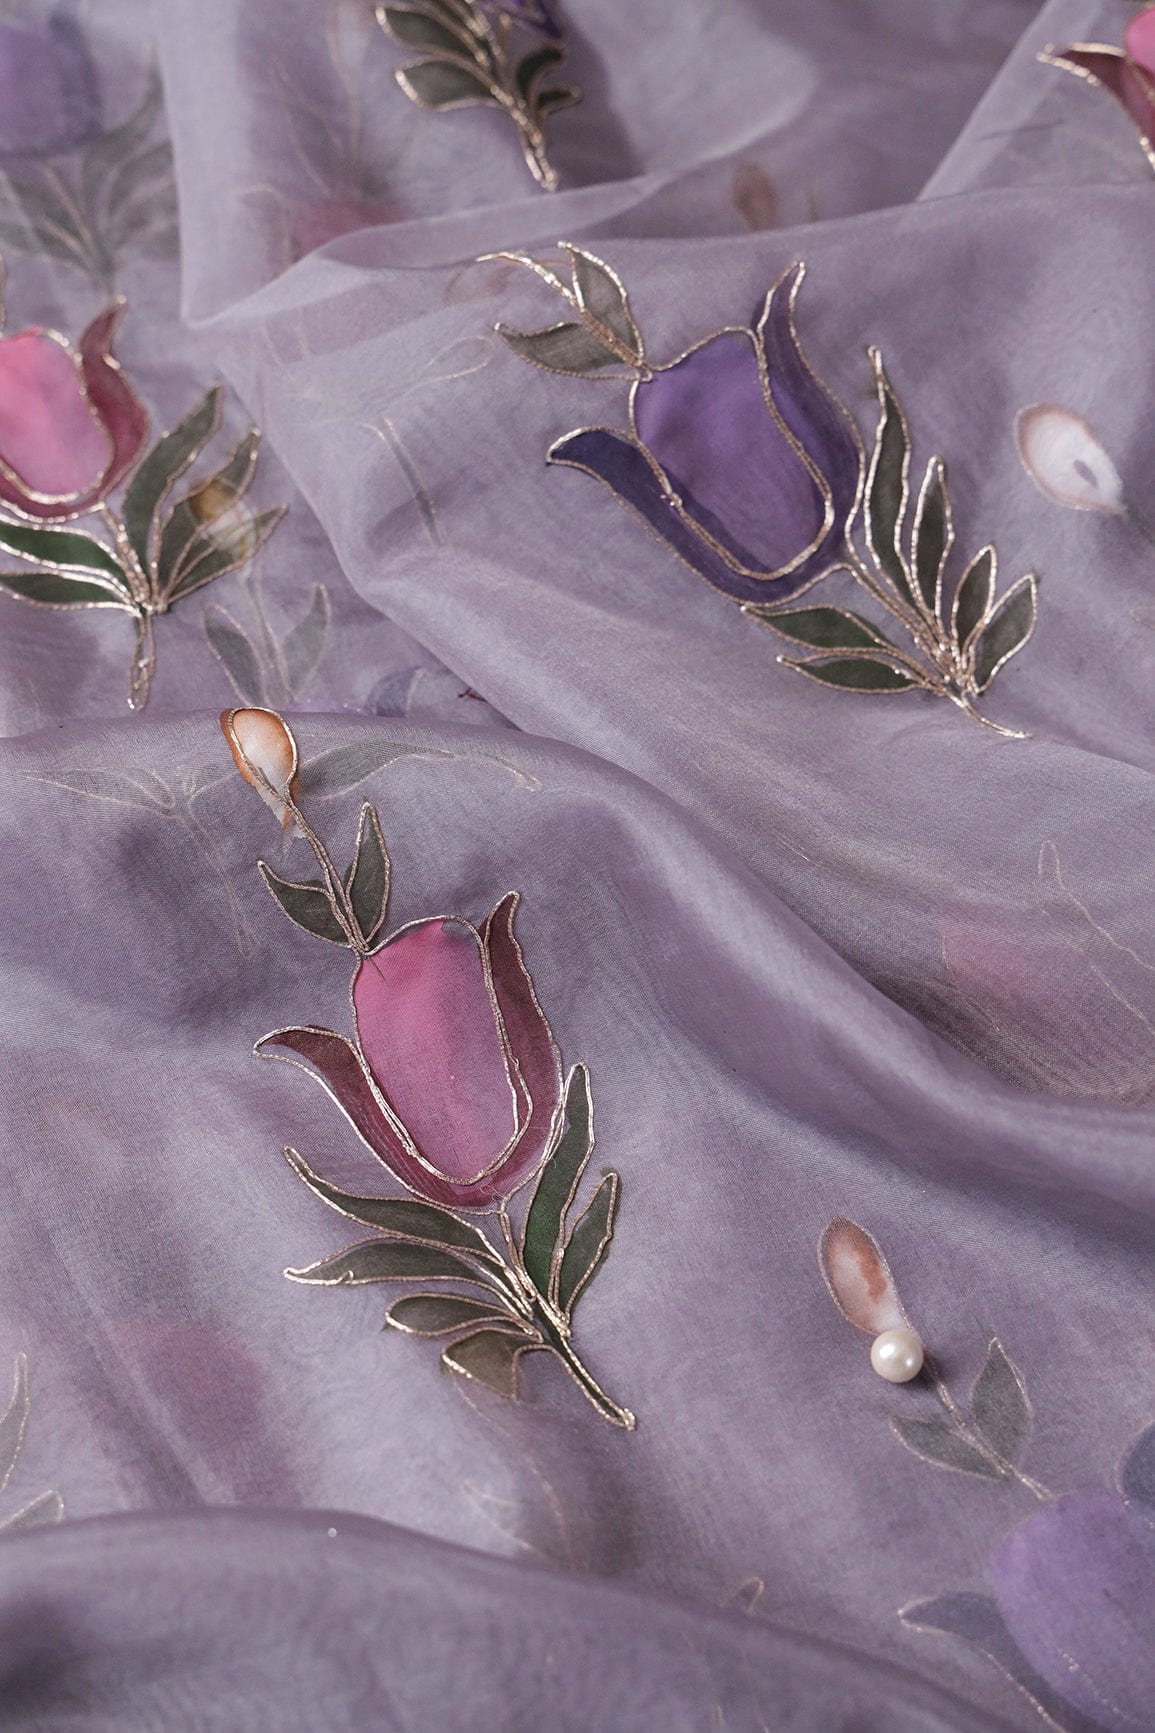 doeraa Embroidery Fabrics Beautiful Floral Hand Painted With Embroidery Work On Lilac Purple Organza Fabric